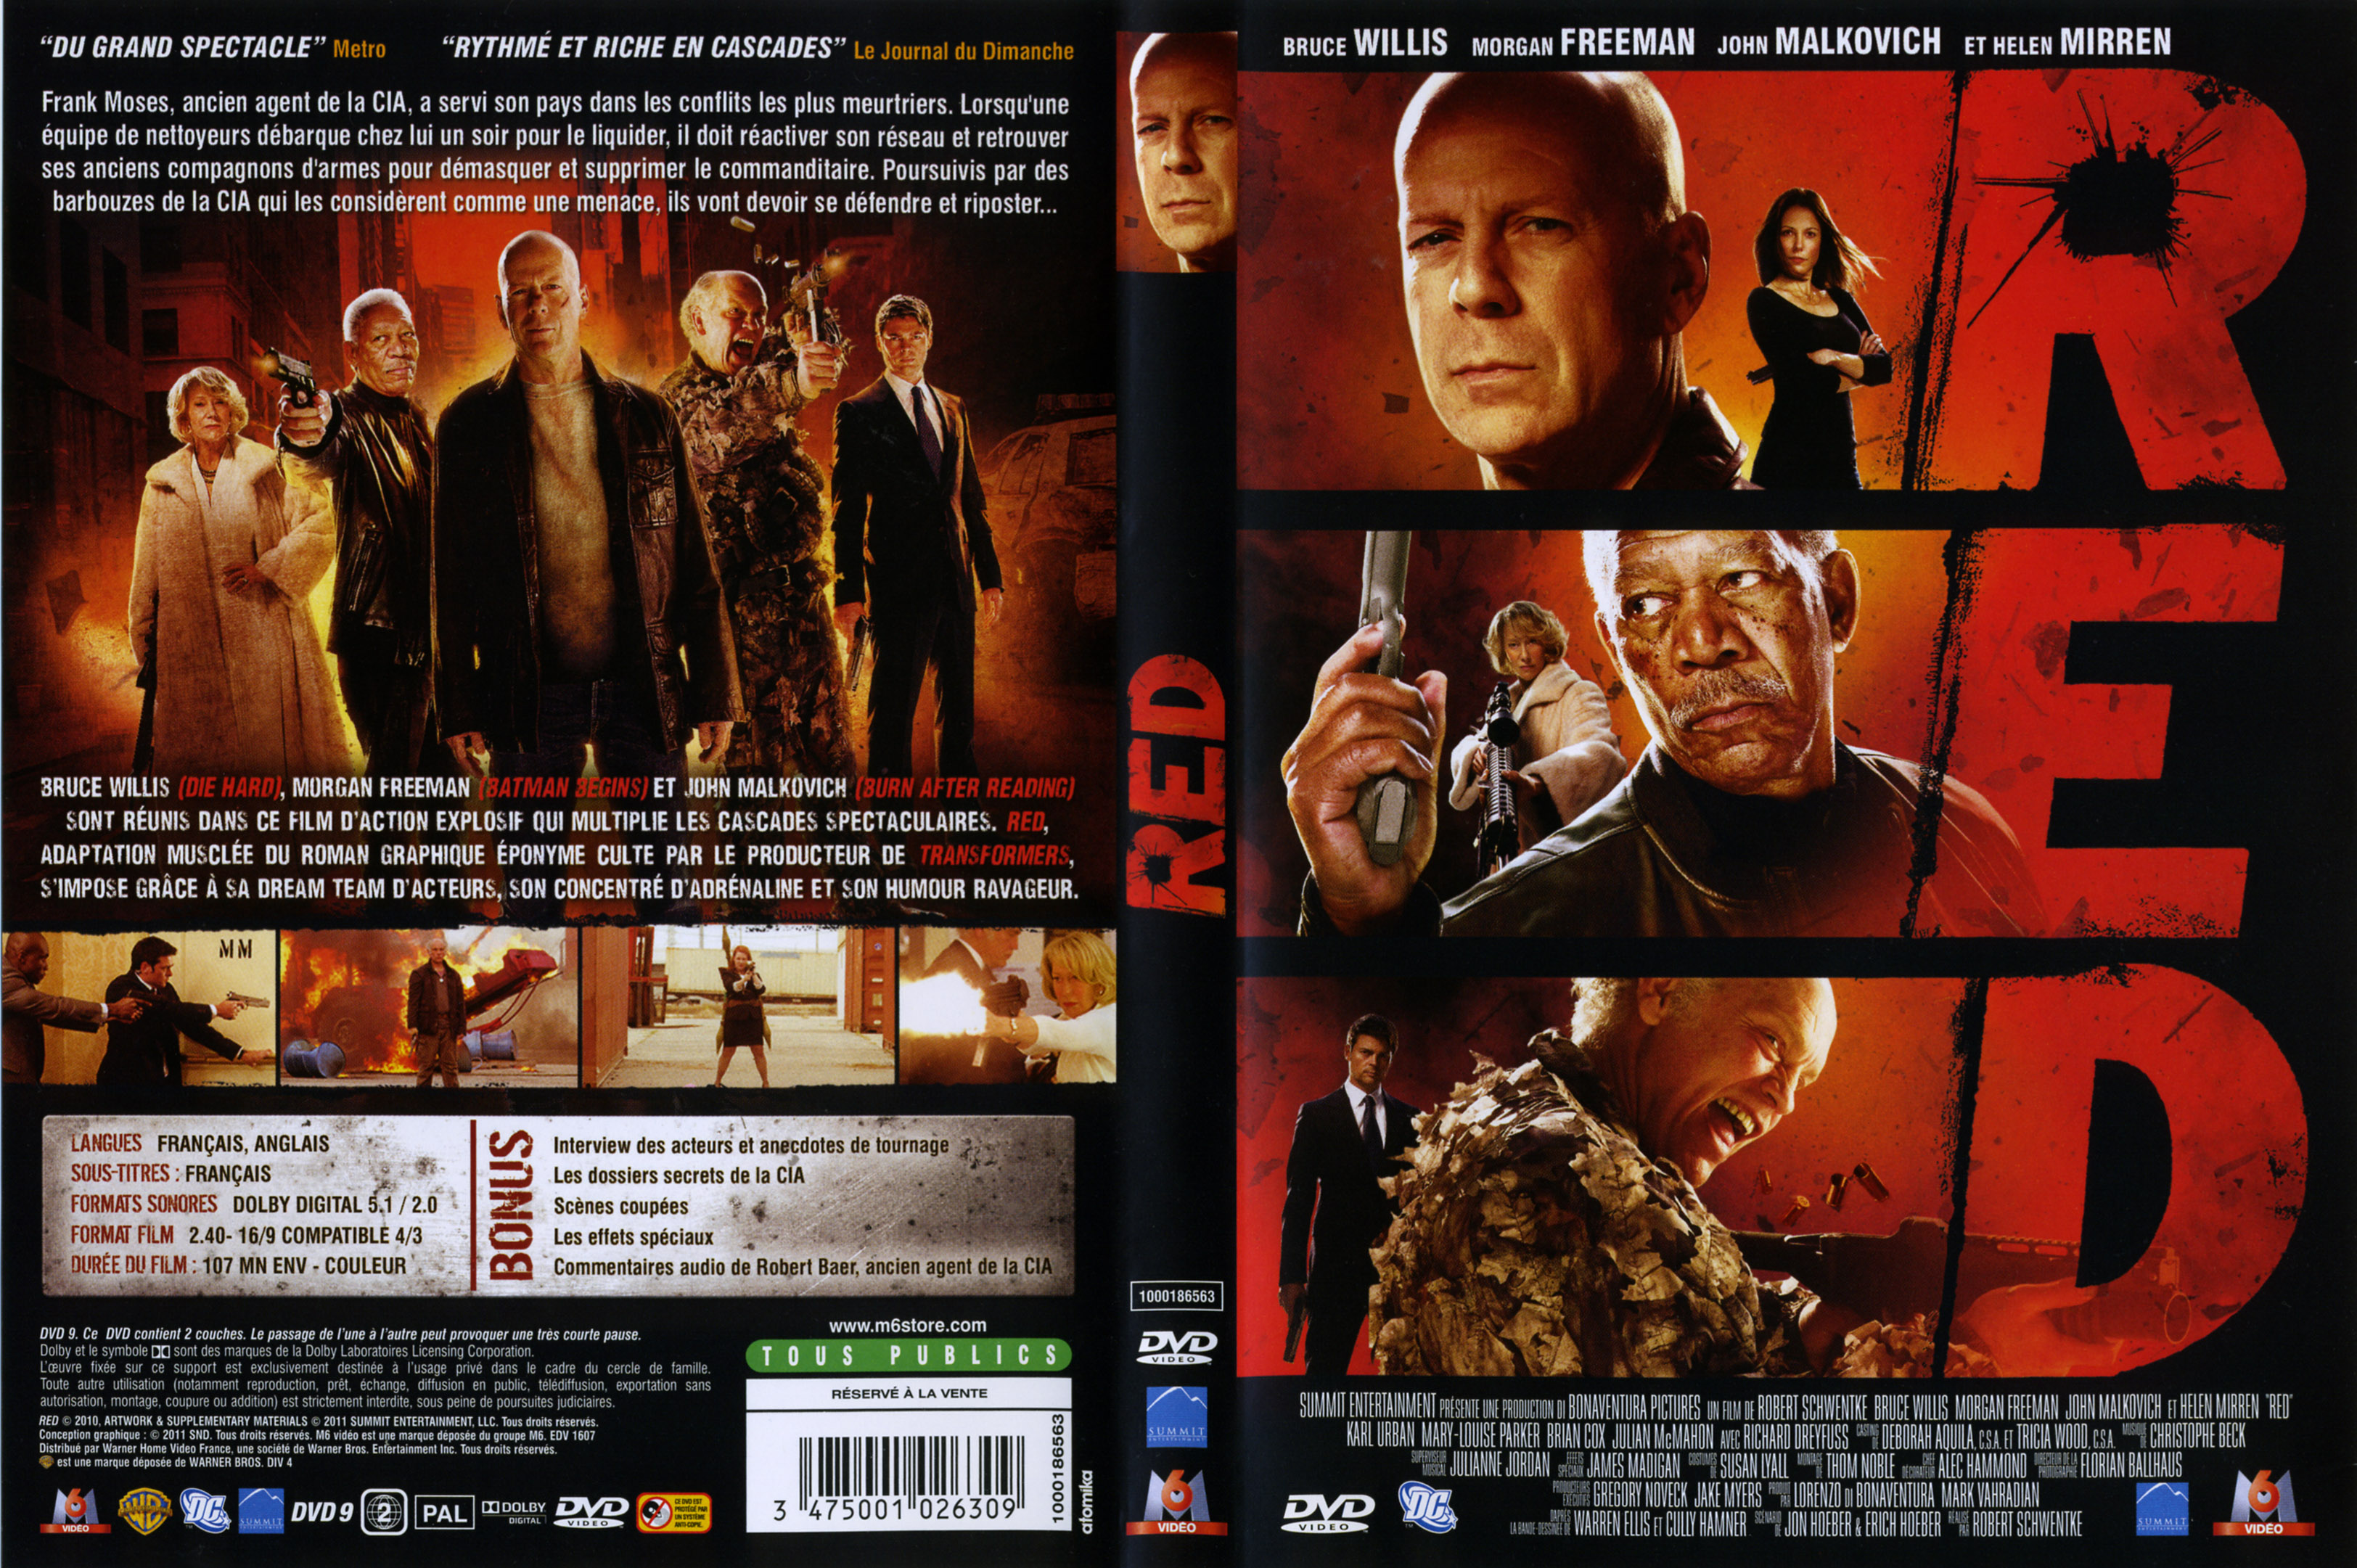 Jaquette DVD RED